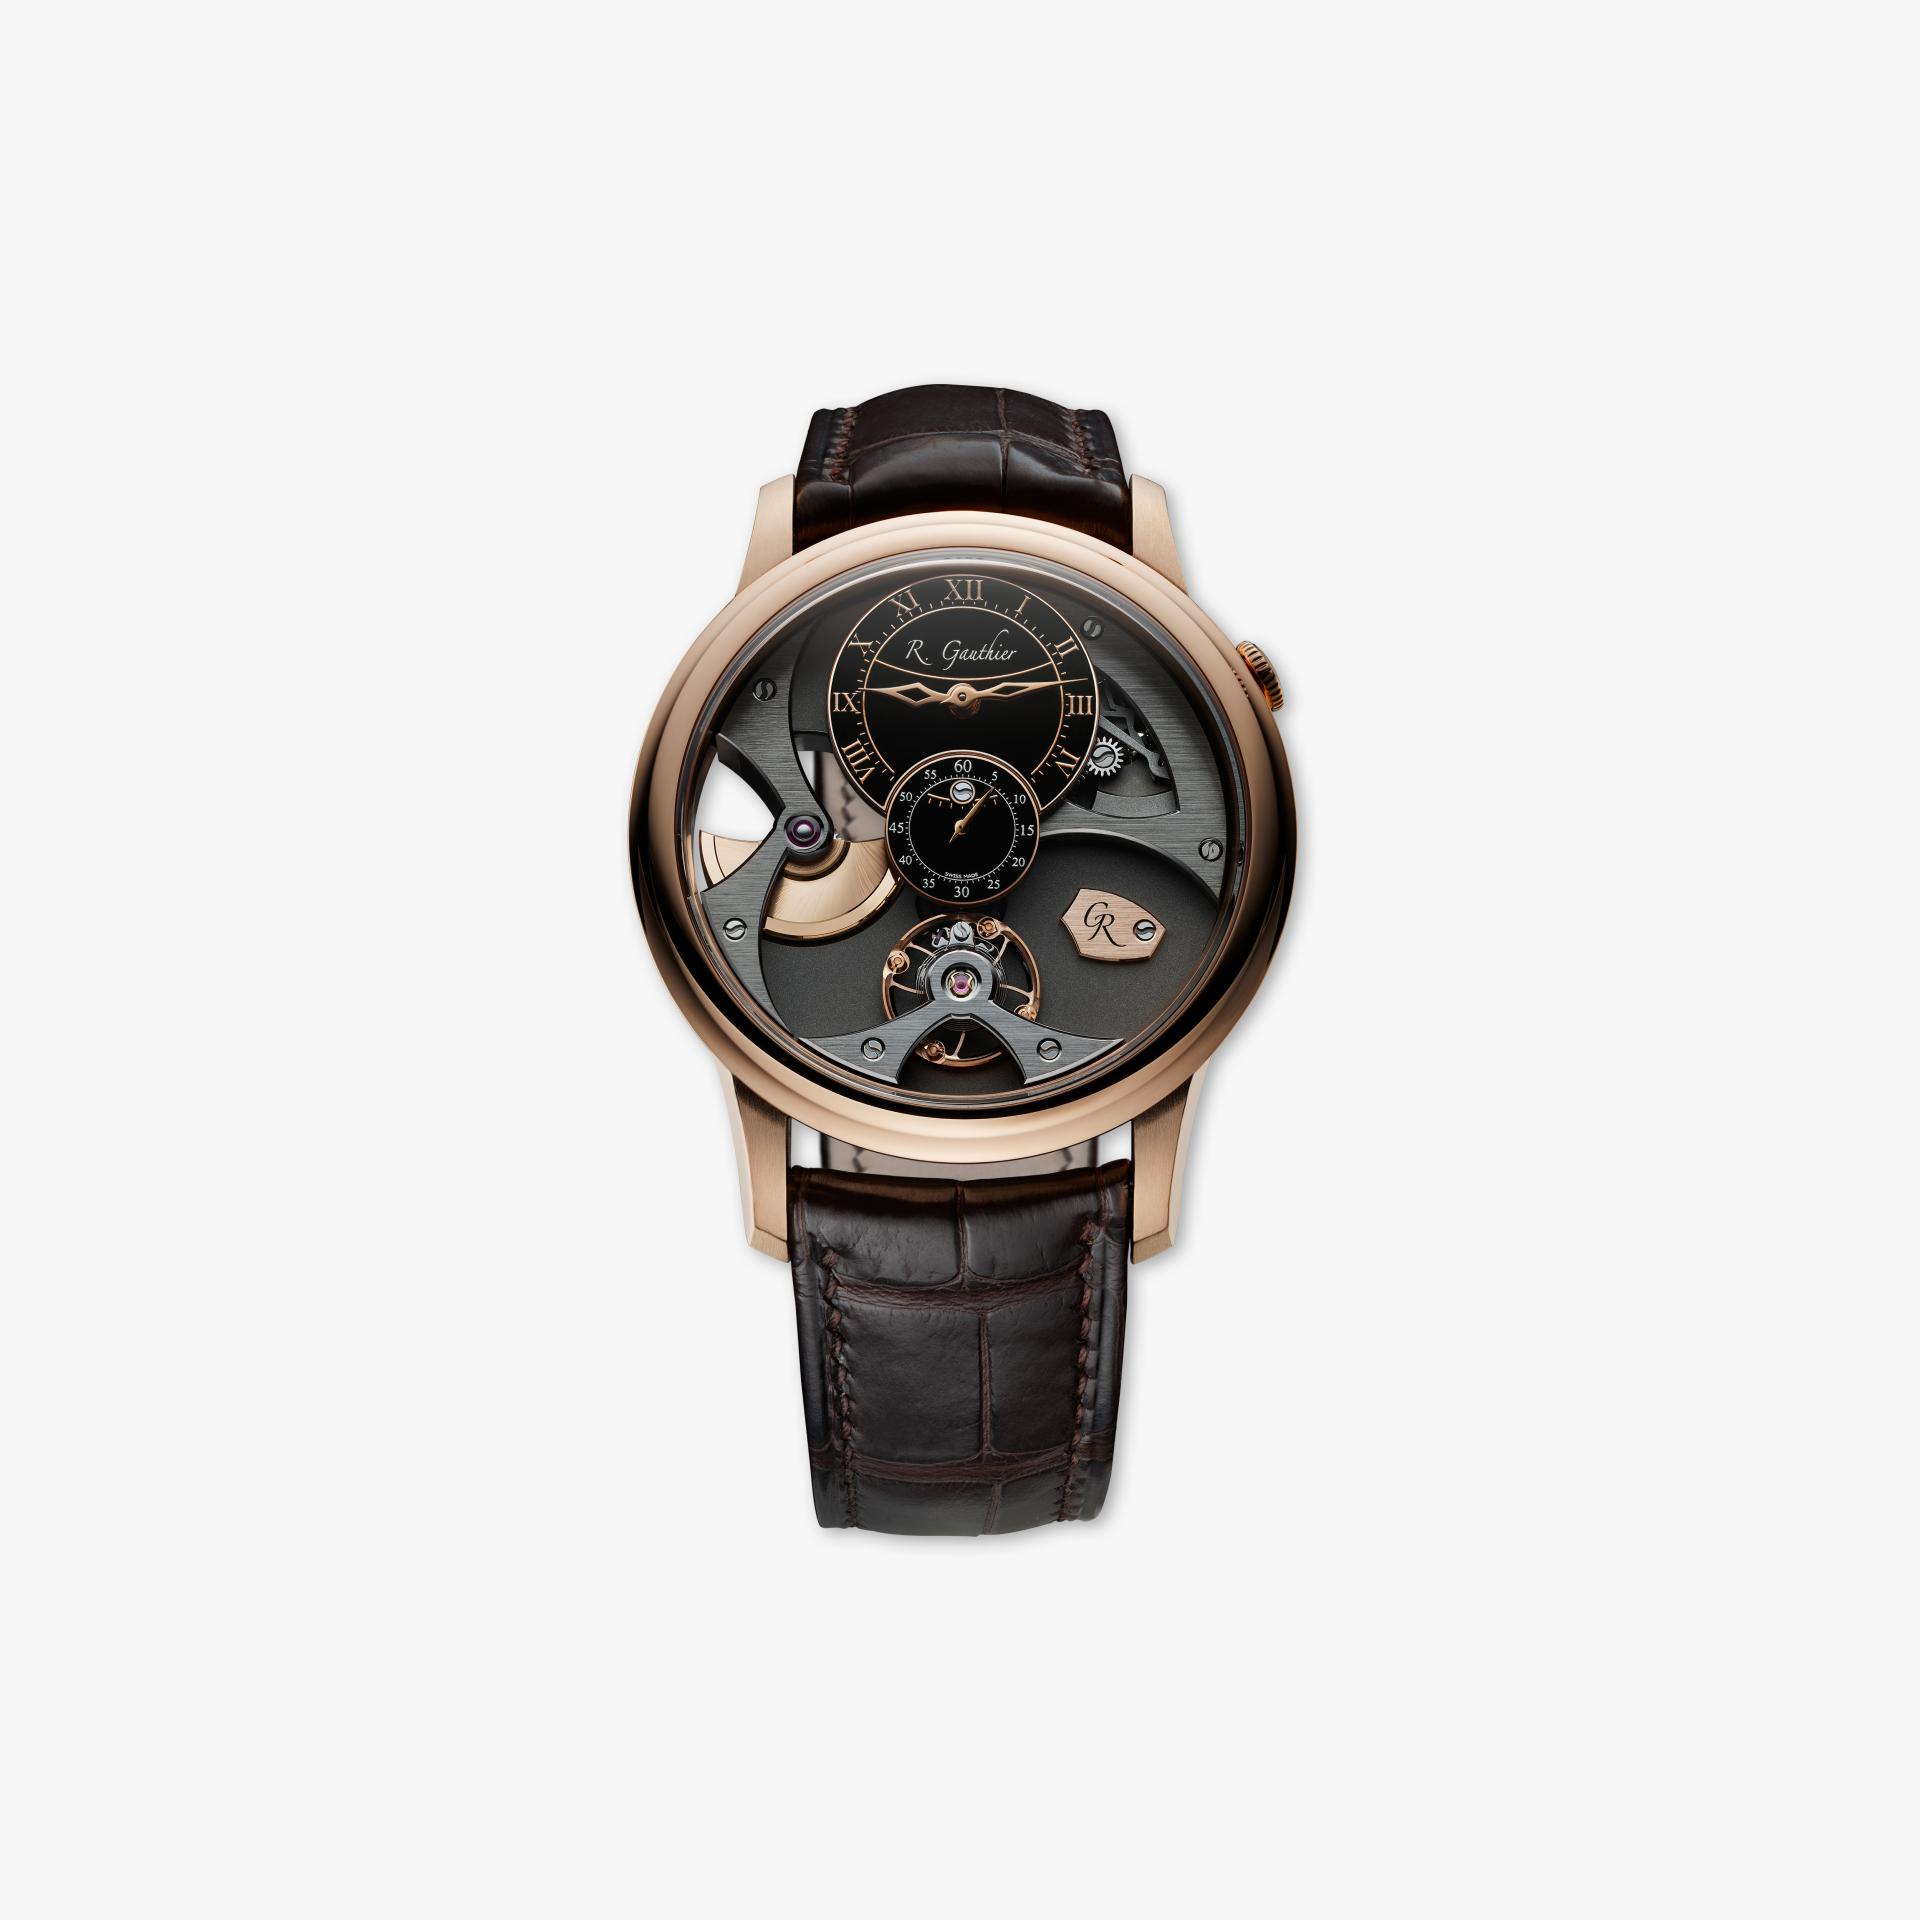 Heritage Insight Micro-rotor  made by Romain Gauthier